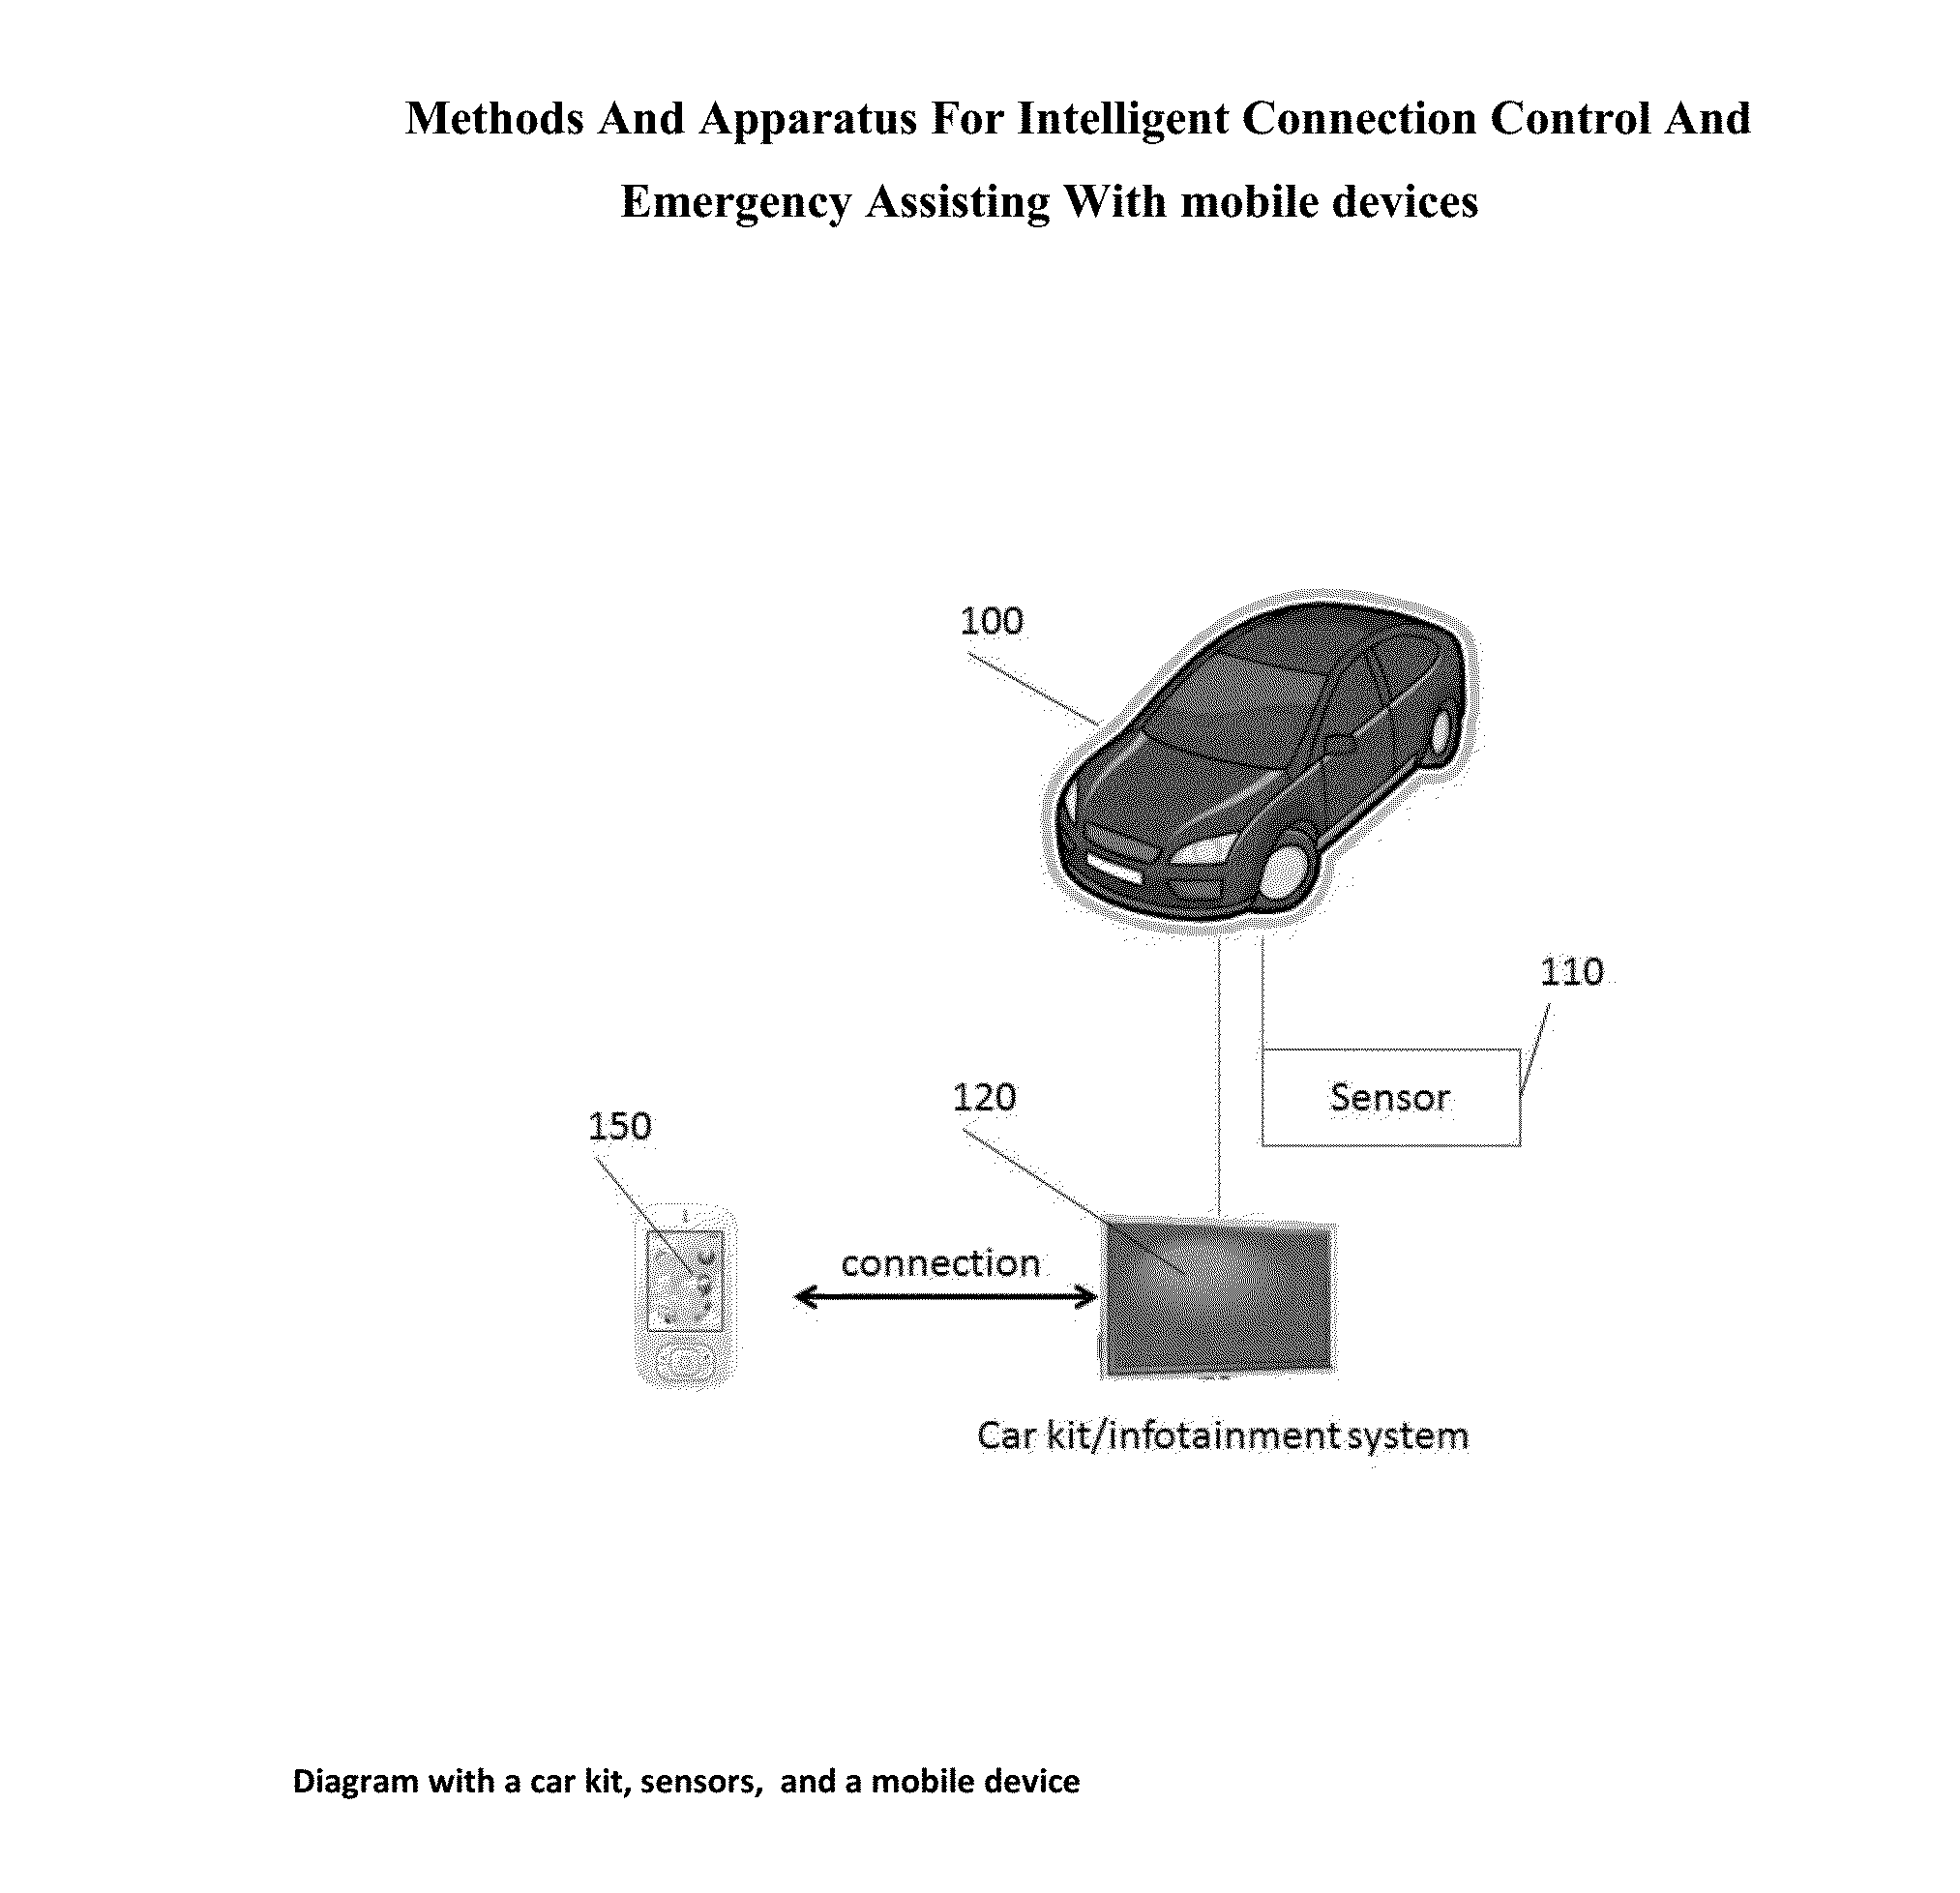 Methods And Apparatus For Intelligent Connection Control And Emergency Assisting With mobile devices